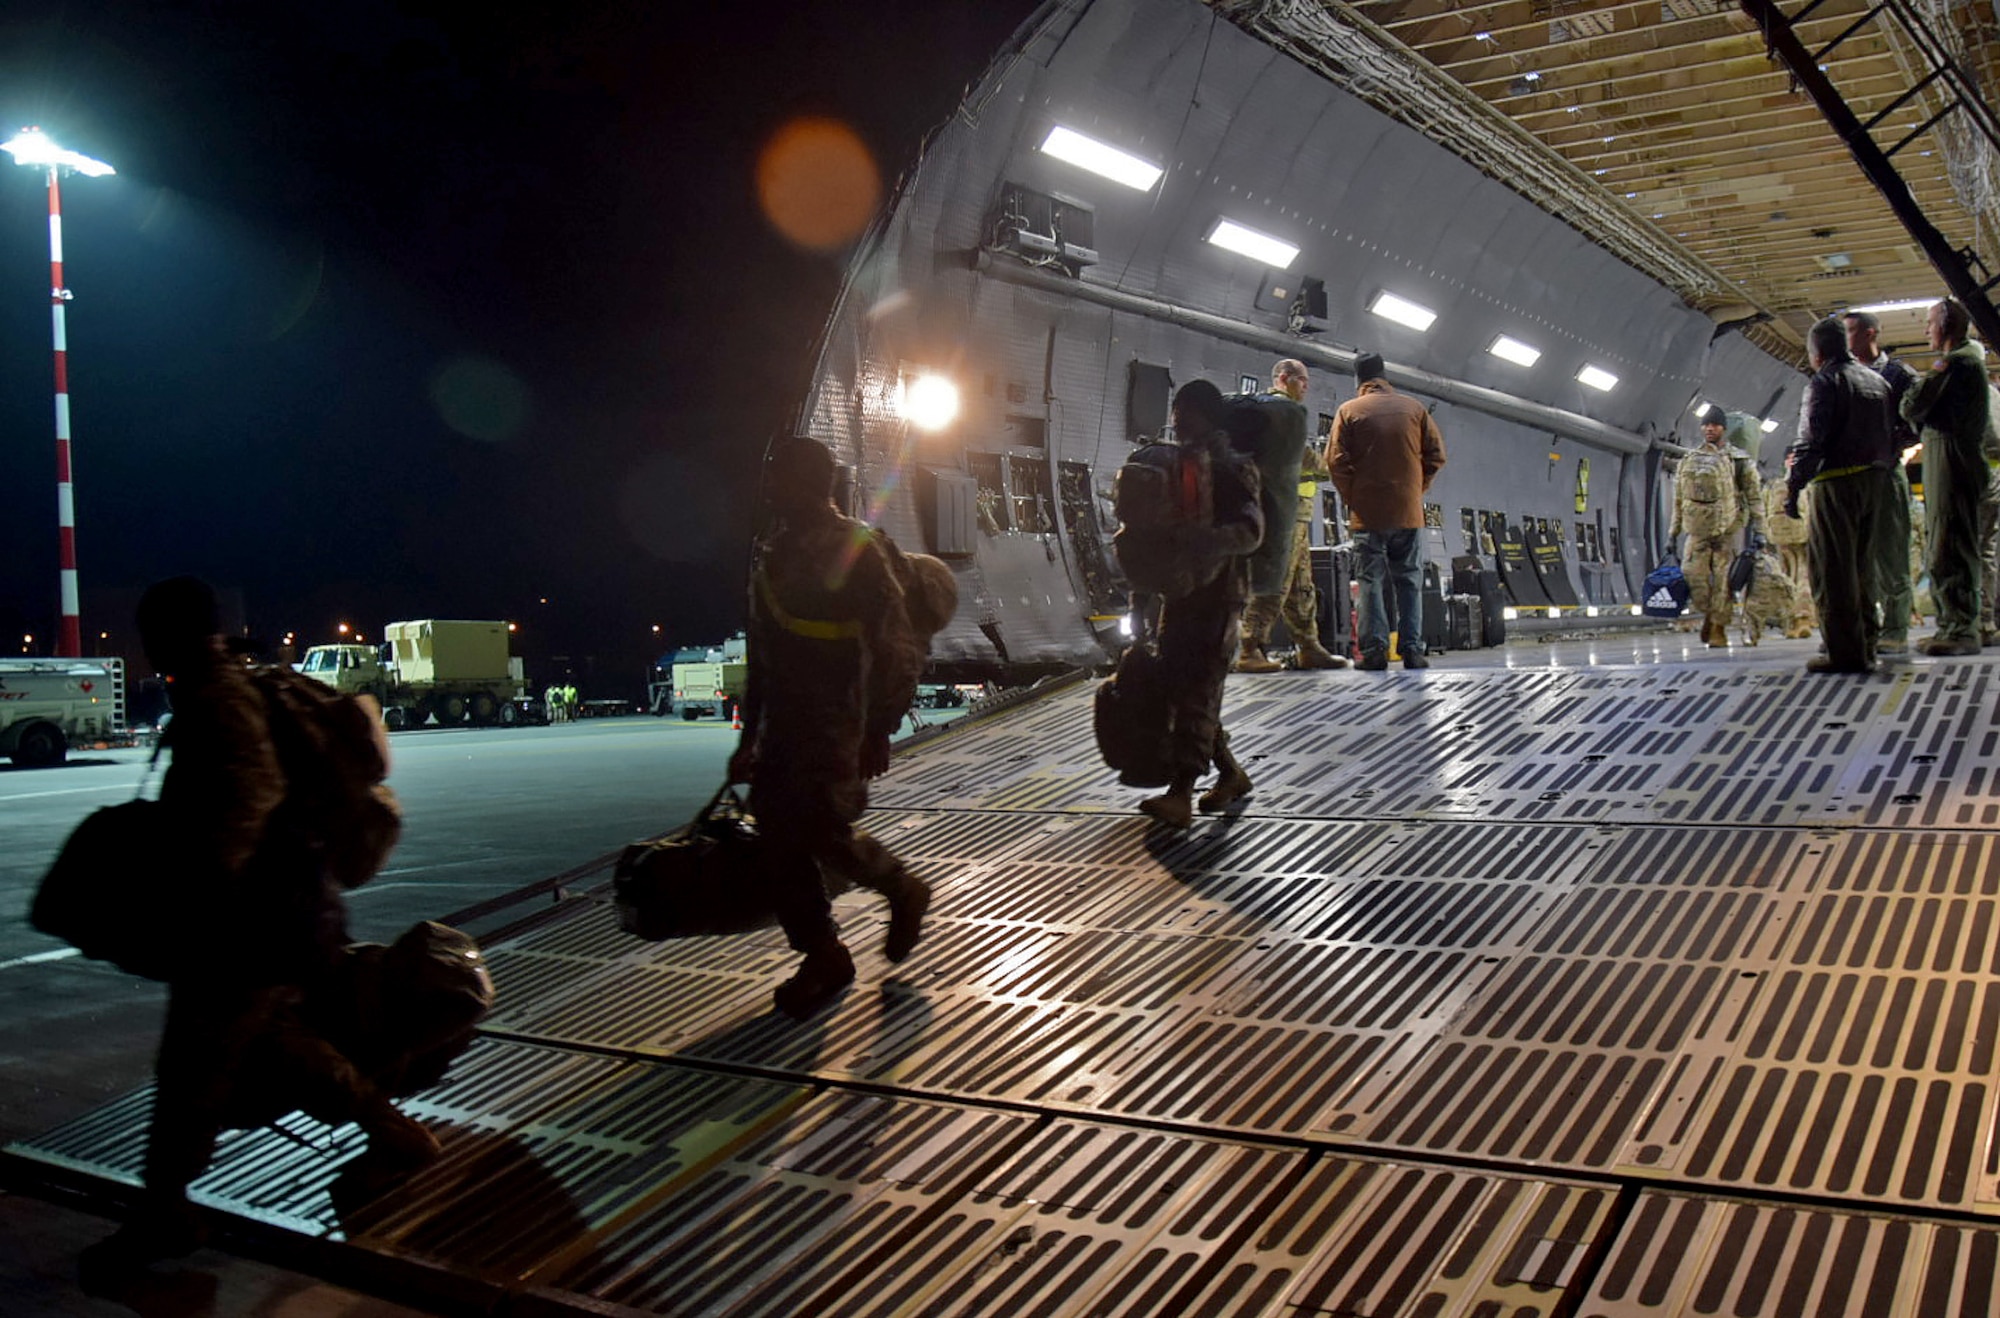 U.S. Army Soldiers belonging to the 10th Combat Aviation Brigade from Ft. Drum, N.Y. walk off the ramp of a C-5M Super Galaxy at  Riga, Latvia, to begin their nine-month deployment in support of Operation Atlantic Resolve on Mar. 4, 2017. (U.S. Air Force photo/Tech. Sgt. Carlos J. Trevino)

